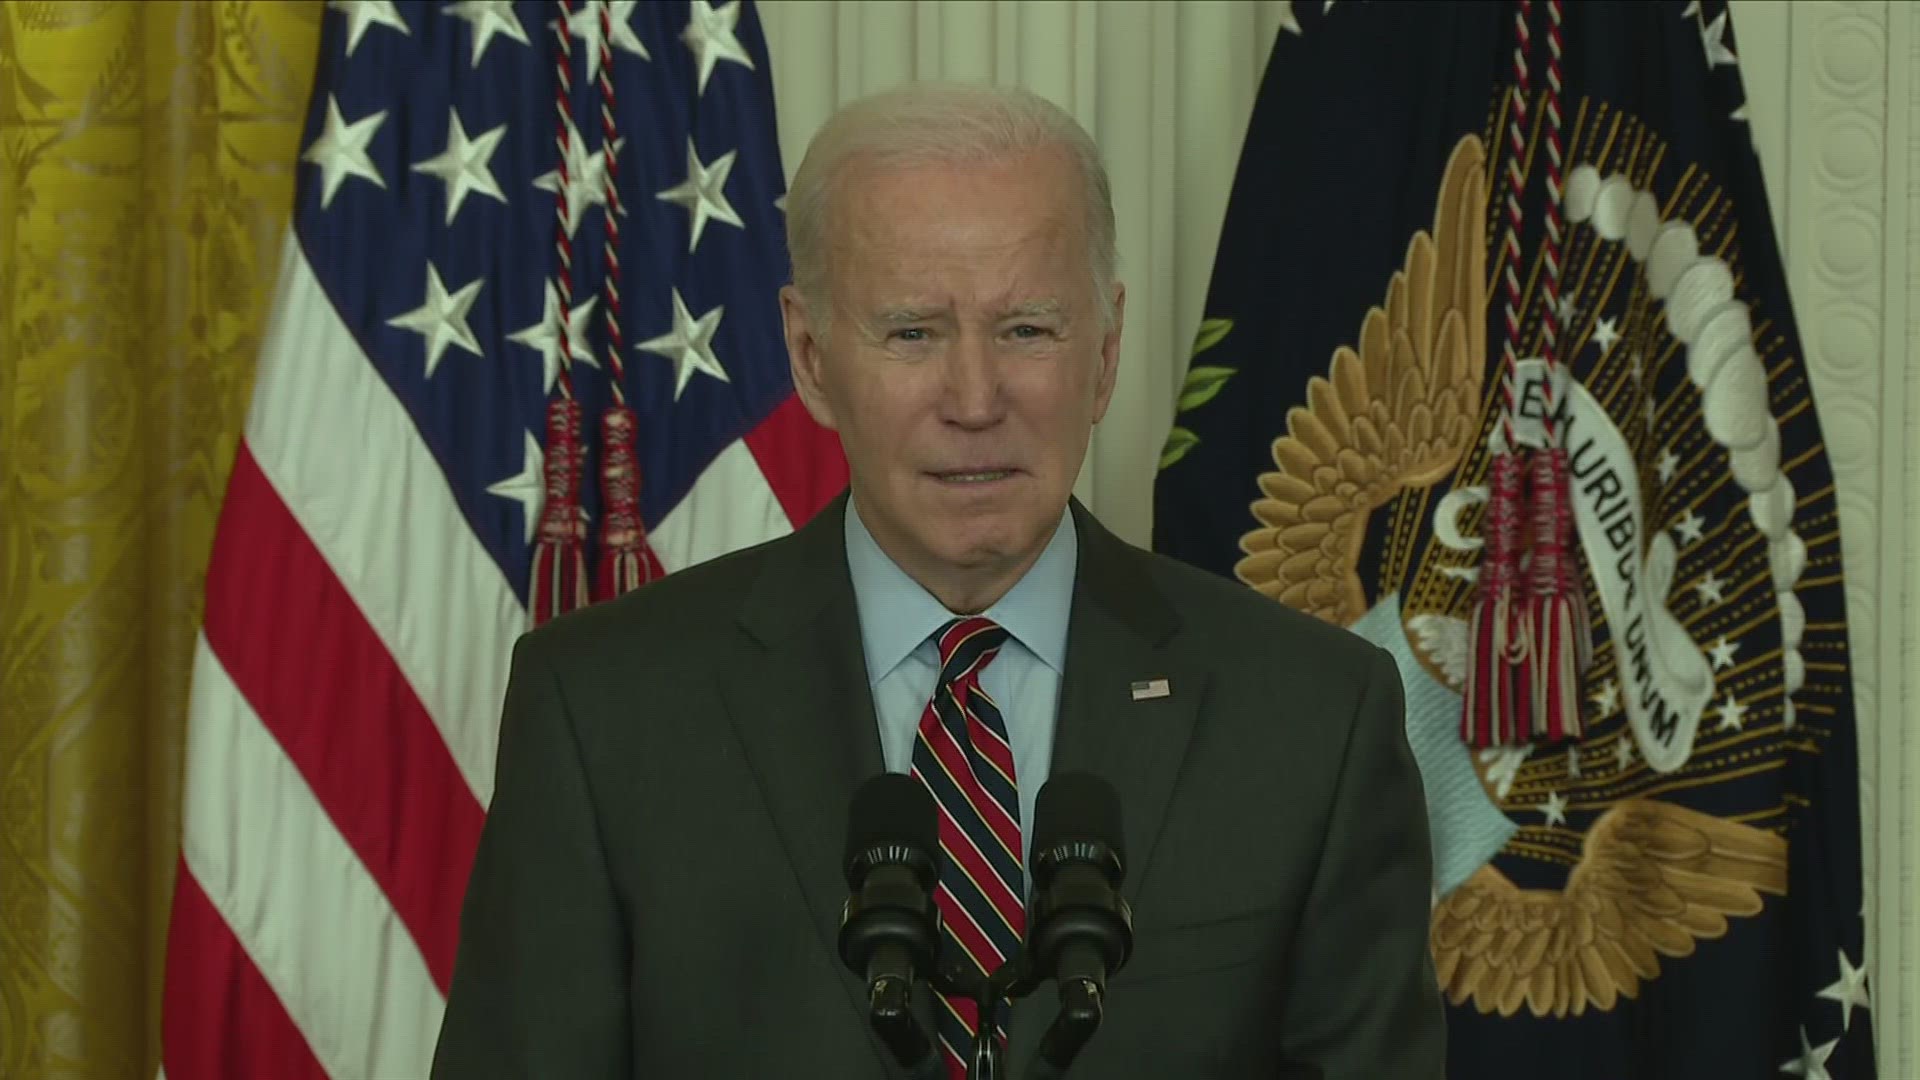 Biden, speaking at a White House event for female business owners, called on Congress to pass a bill banning assault-style weapons.